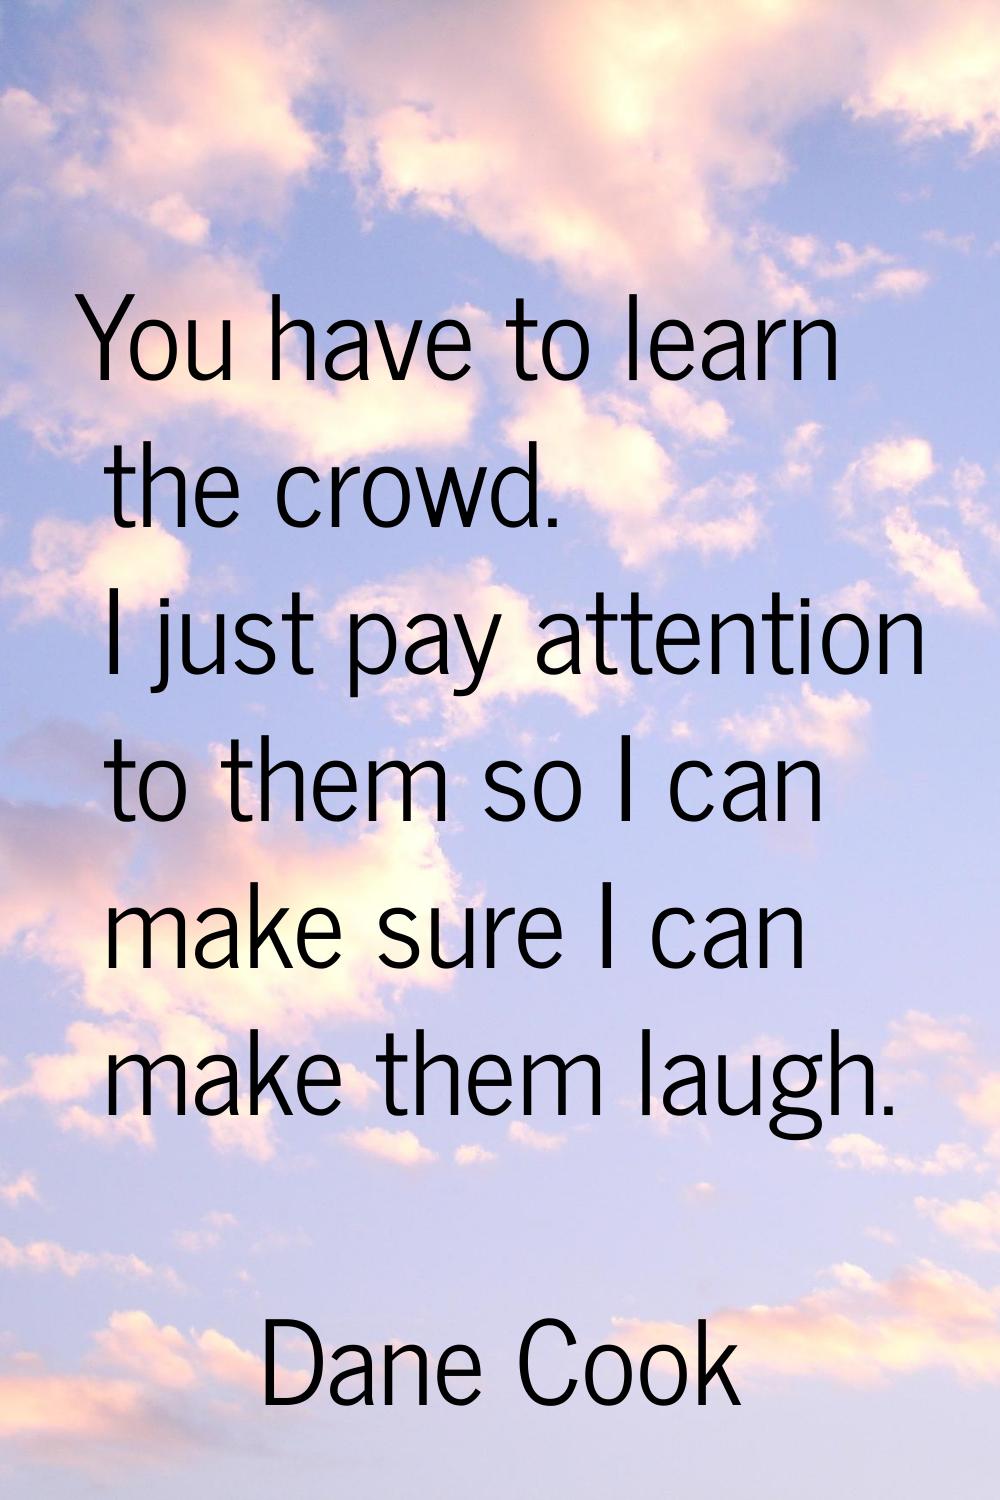 You have to learn the crowd. I just pay attention to them so I can make sure I can make them laugh.